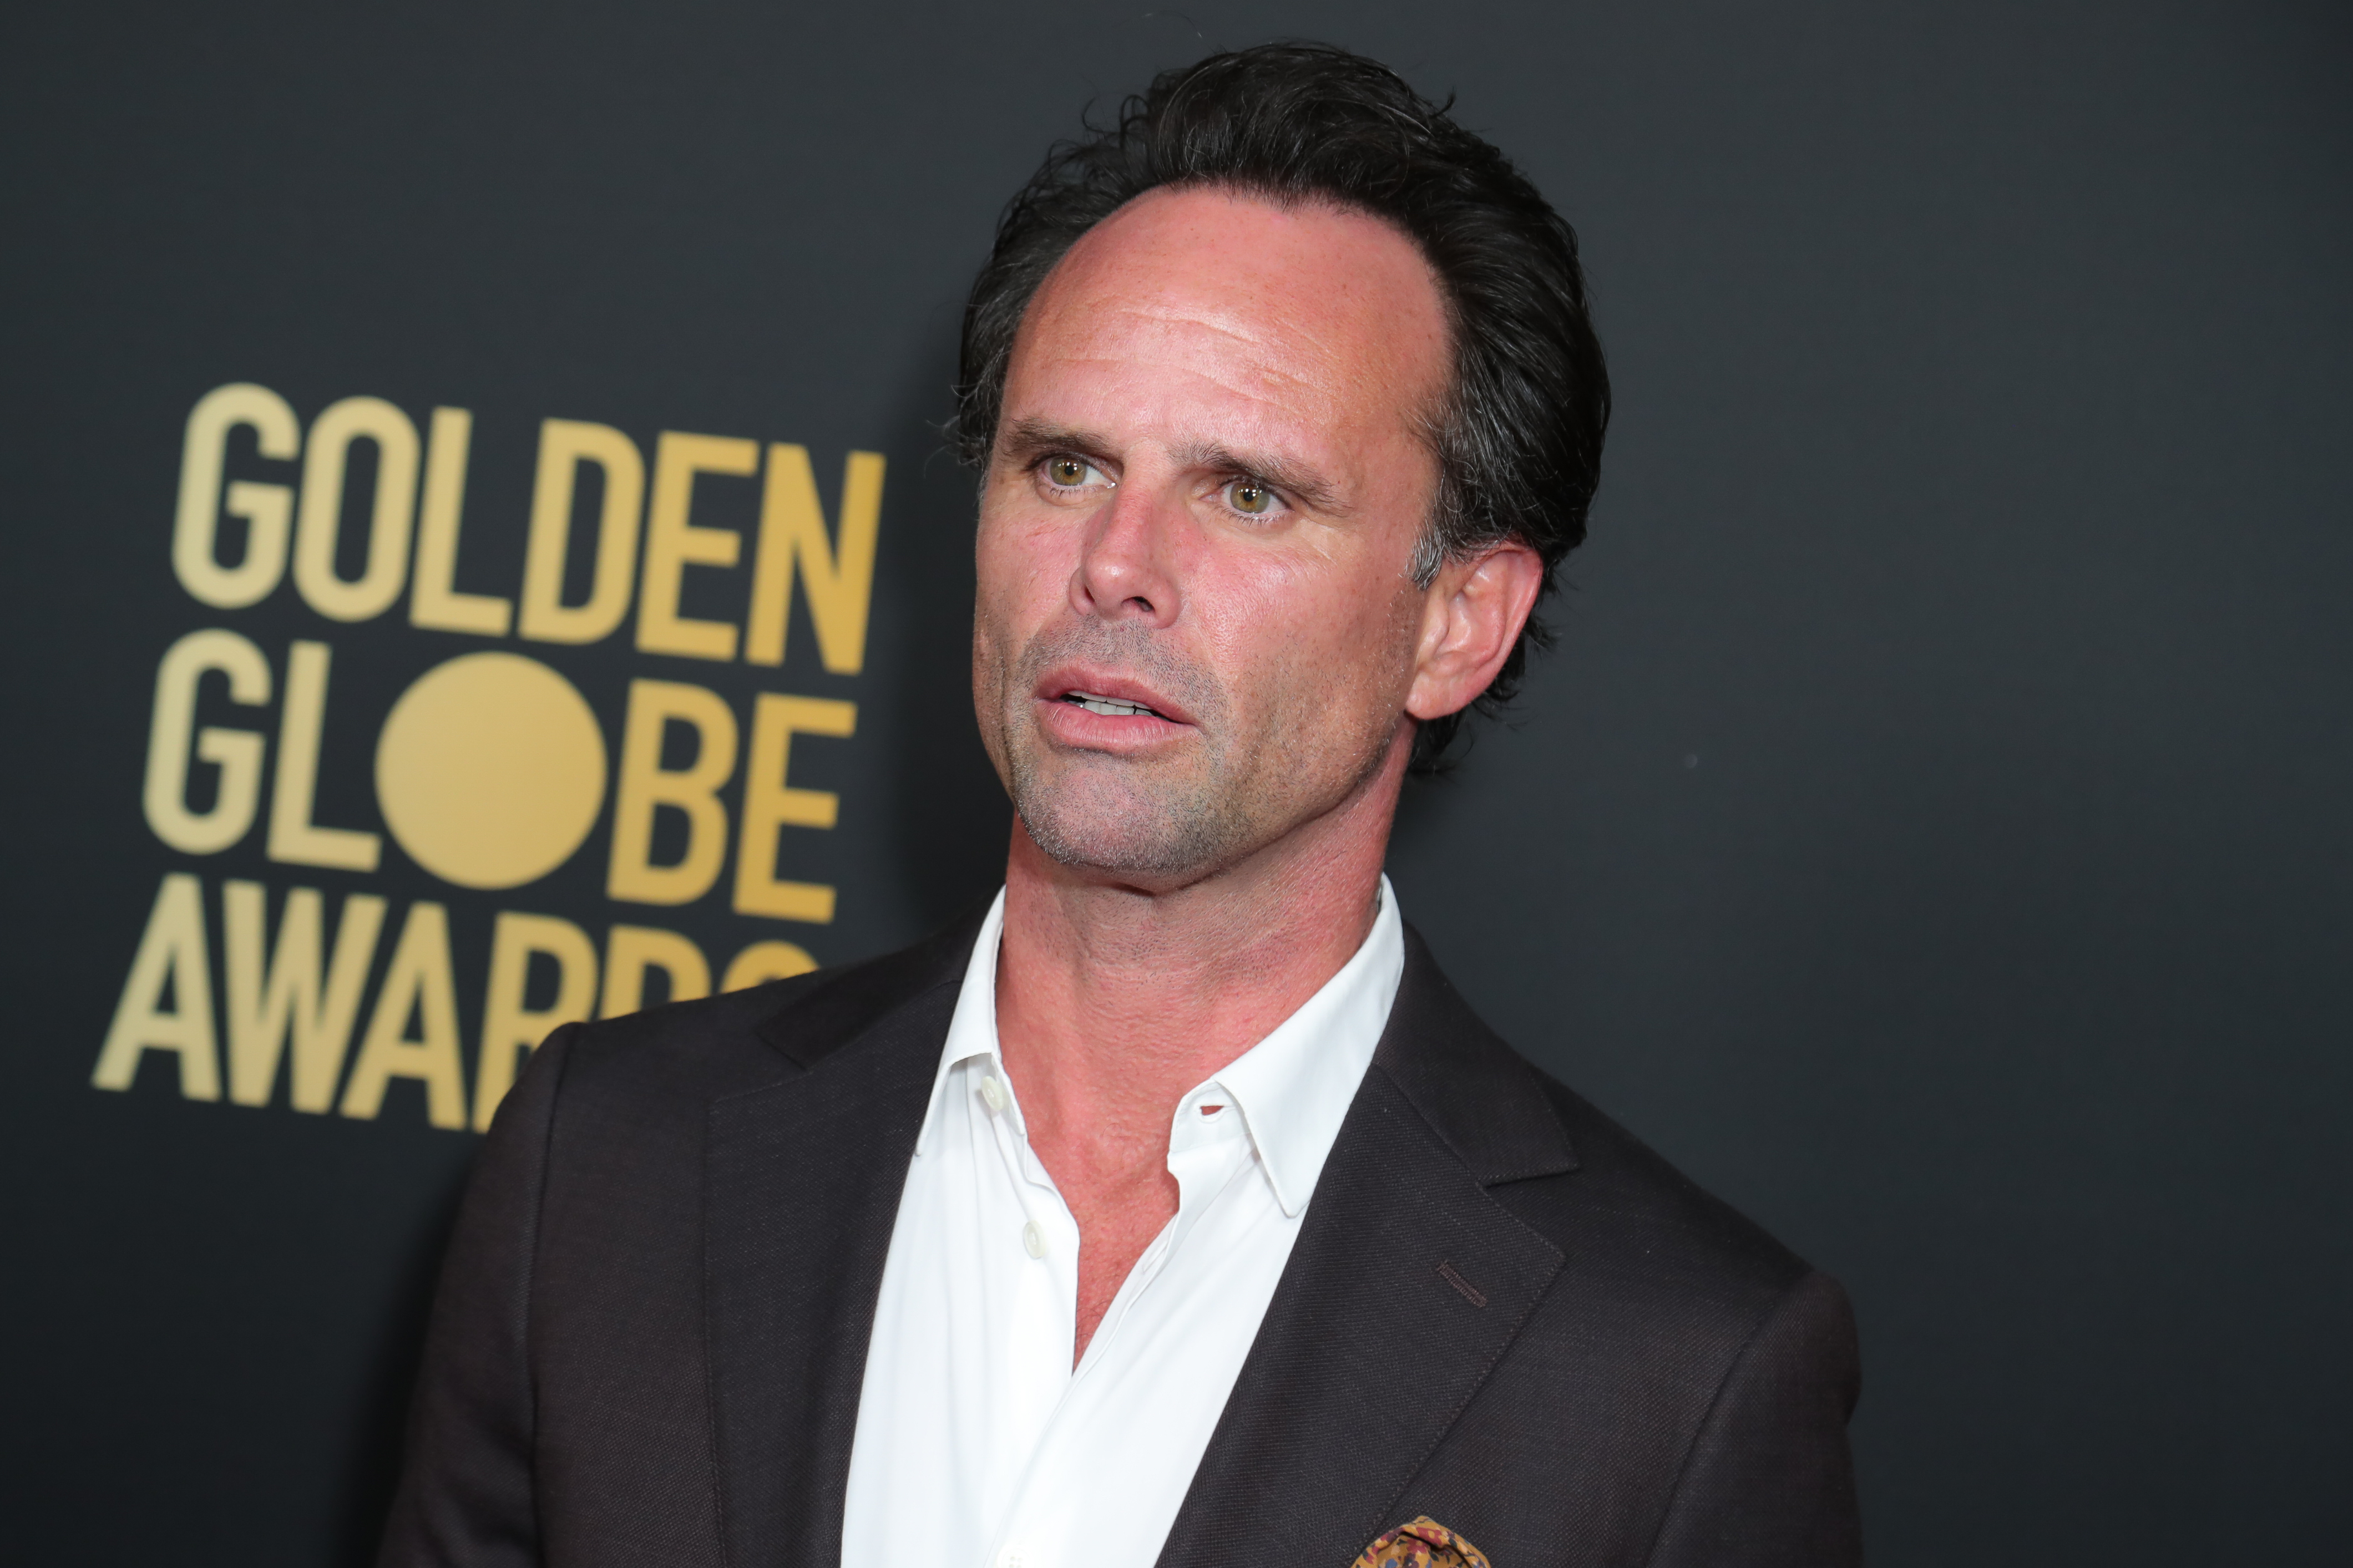 Walton Goggins attends HFPA And THR Golden Globe Ambassador Party at Catch LA on November 14, 2019, in West Hollywood, California. | Source: Getty Images